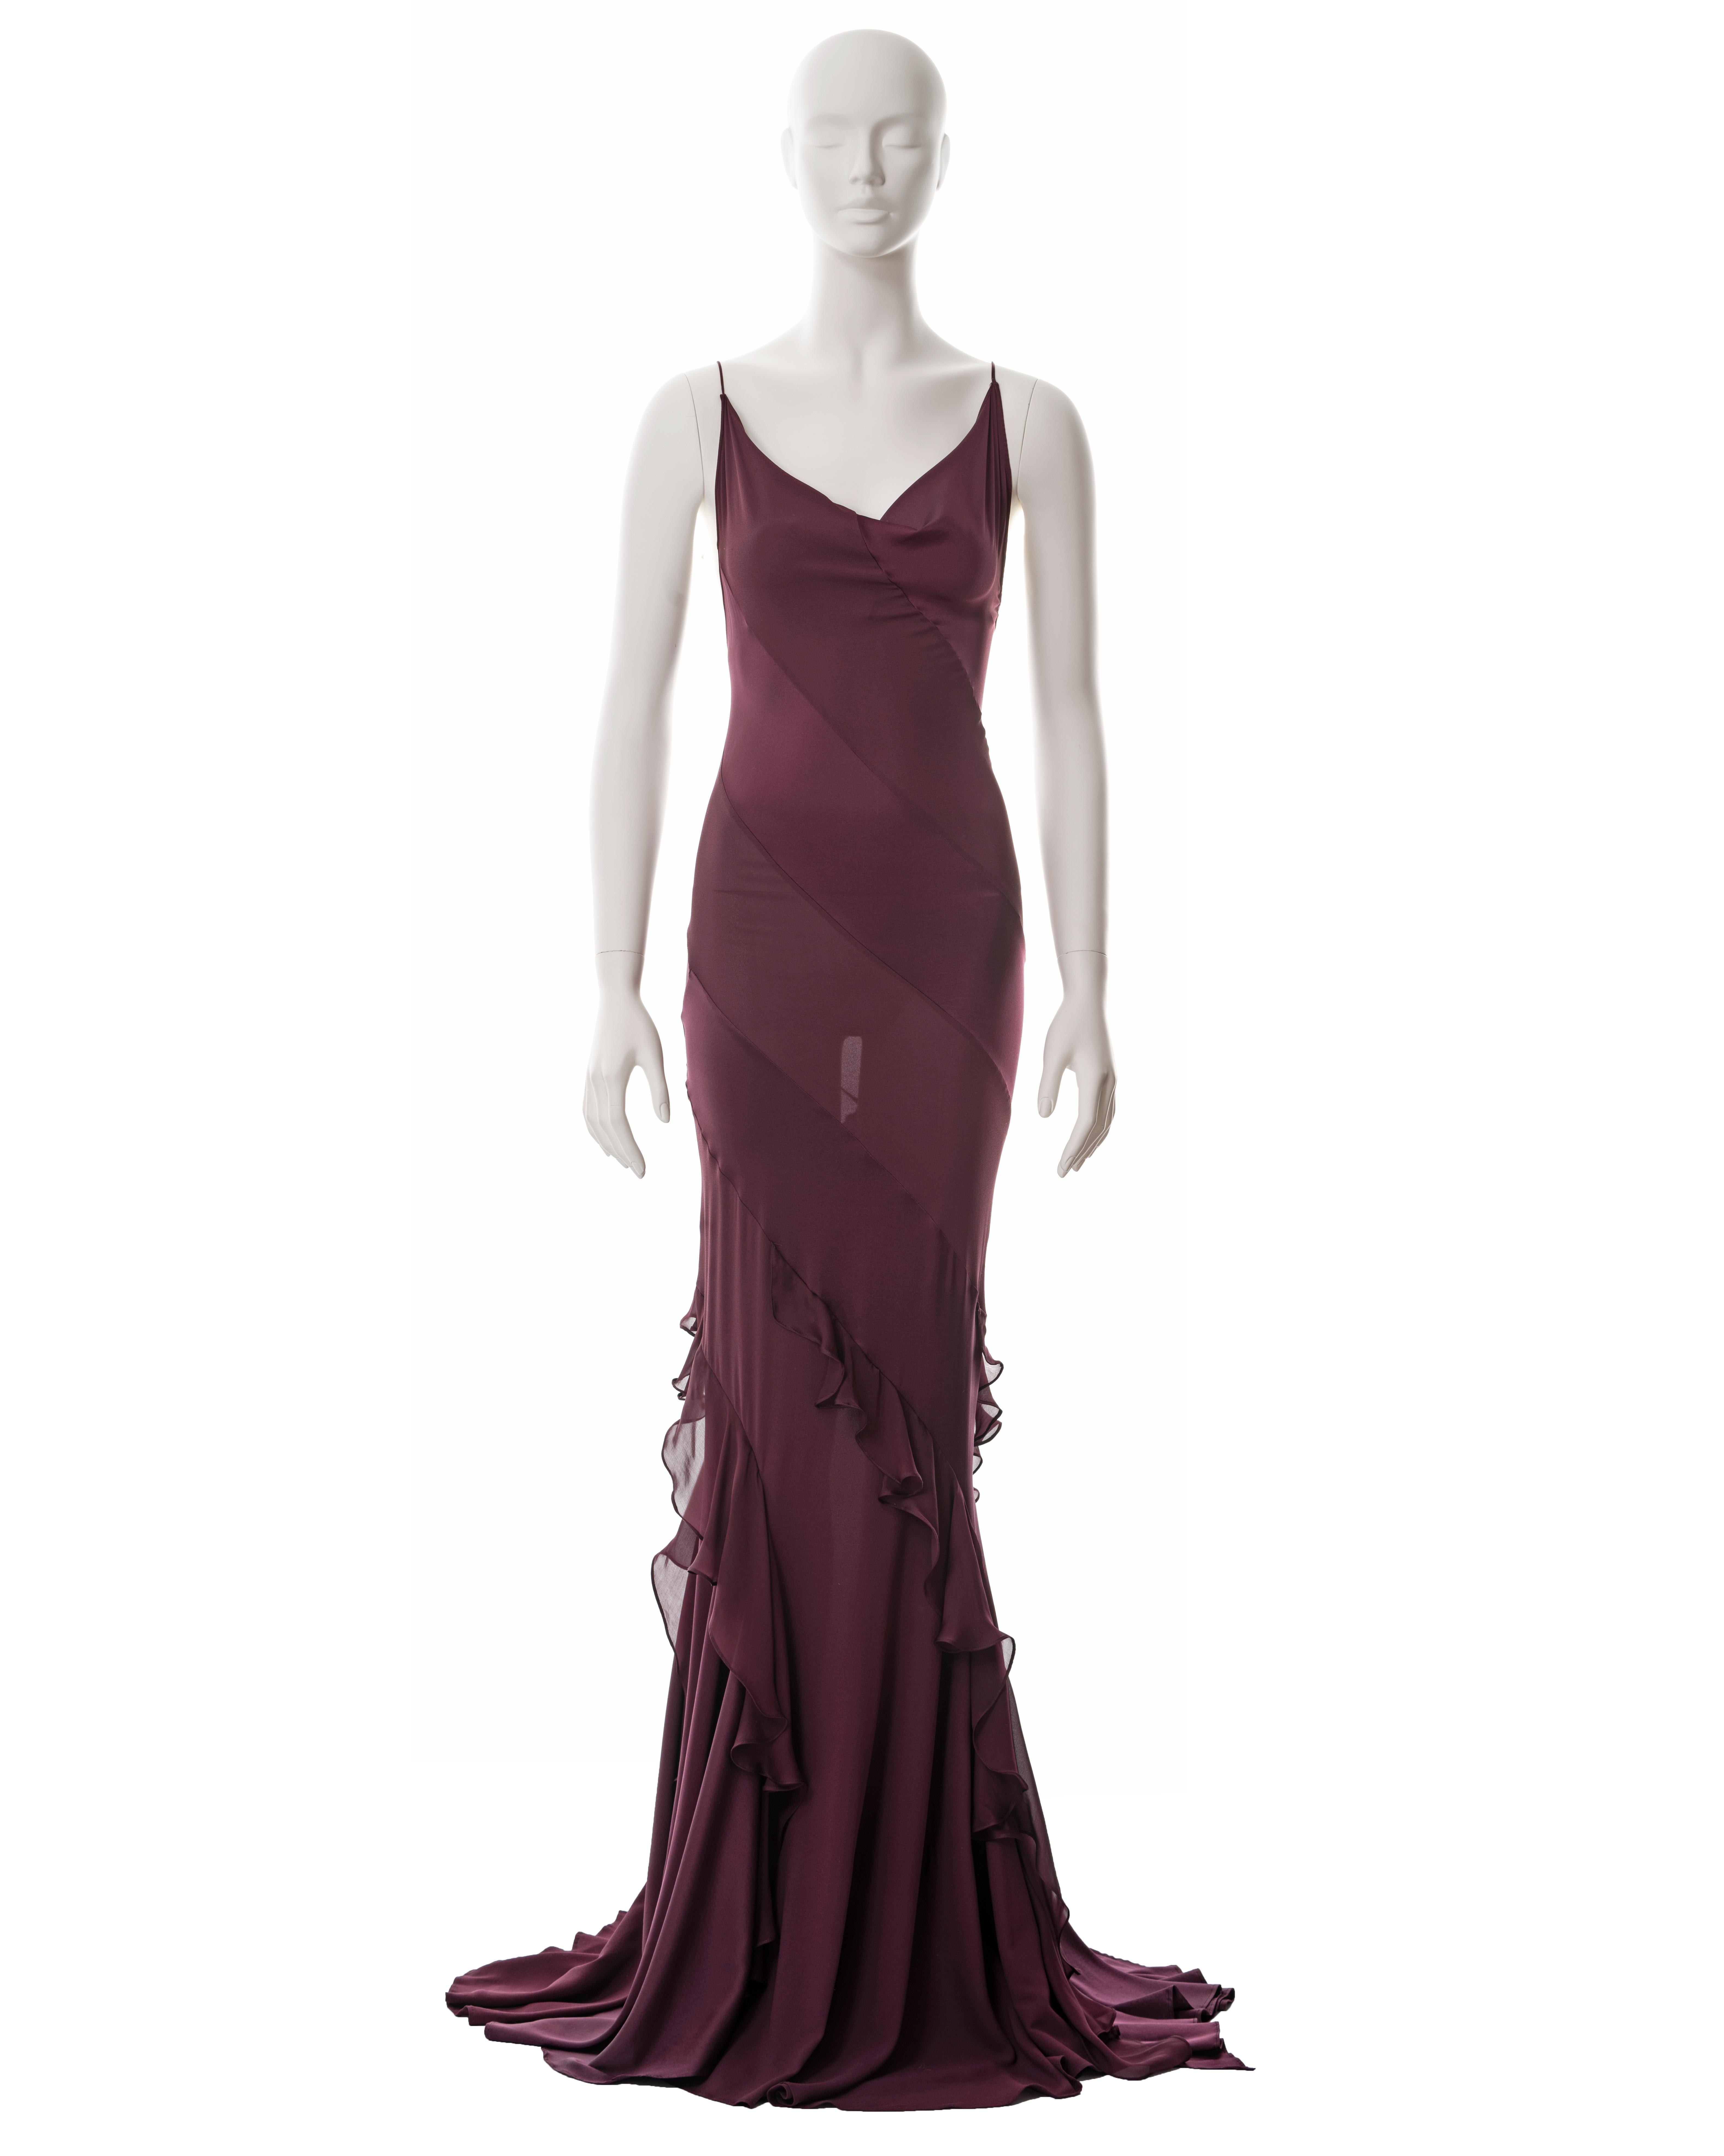 ▪ Roberto Cavalli purple bias cut evening dress
▪ Sold by One of a Kind Archive
▪ Fall-Winter 2004
▪ Cowl neck 
▪ Spaghetti straps 
▪ Silk chiffon frills 
▪ Floor-length skirt with train
▪ Size XS
▪ Made in Italy 

All photographs in this listing